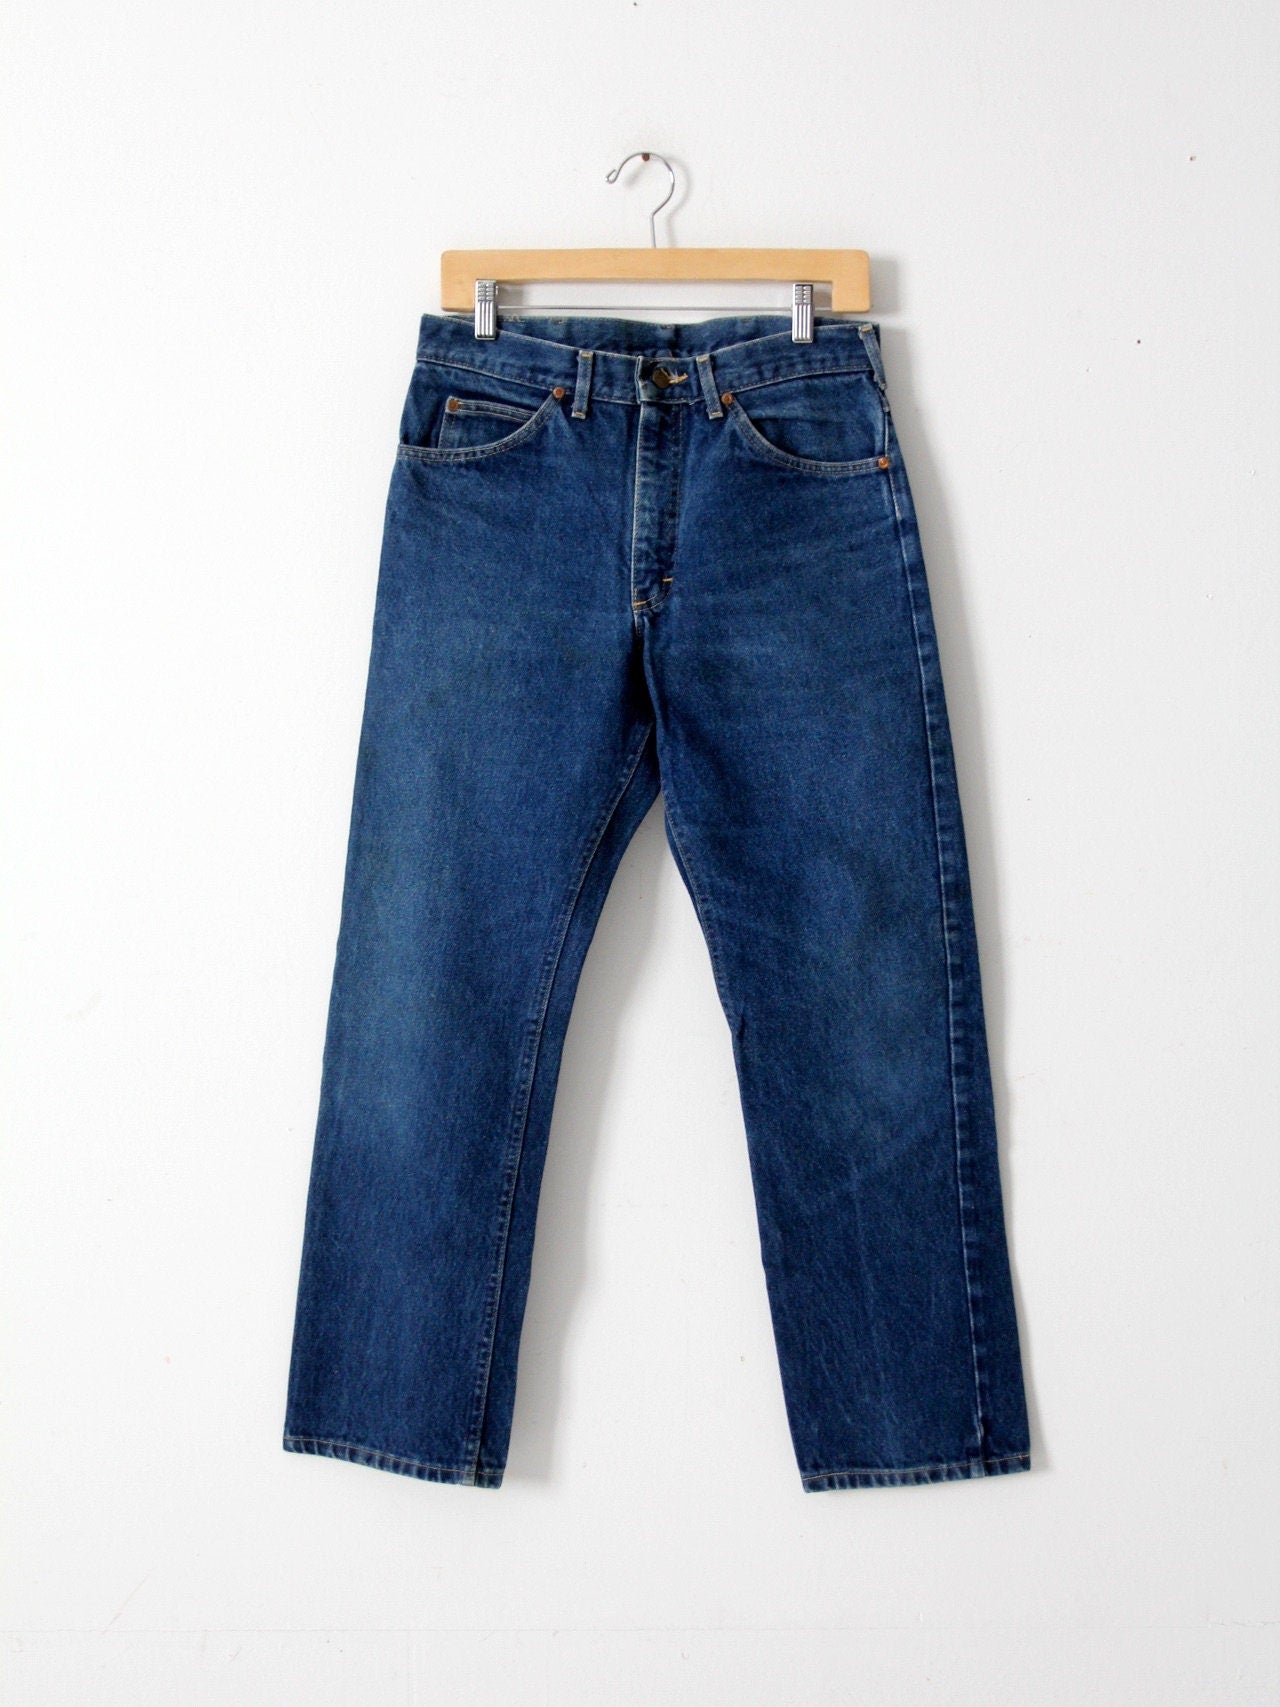 80s Lee Riders High Waisted Dark Wash Jeans - Small Long, 26.5